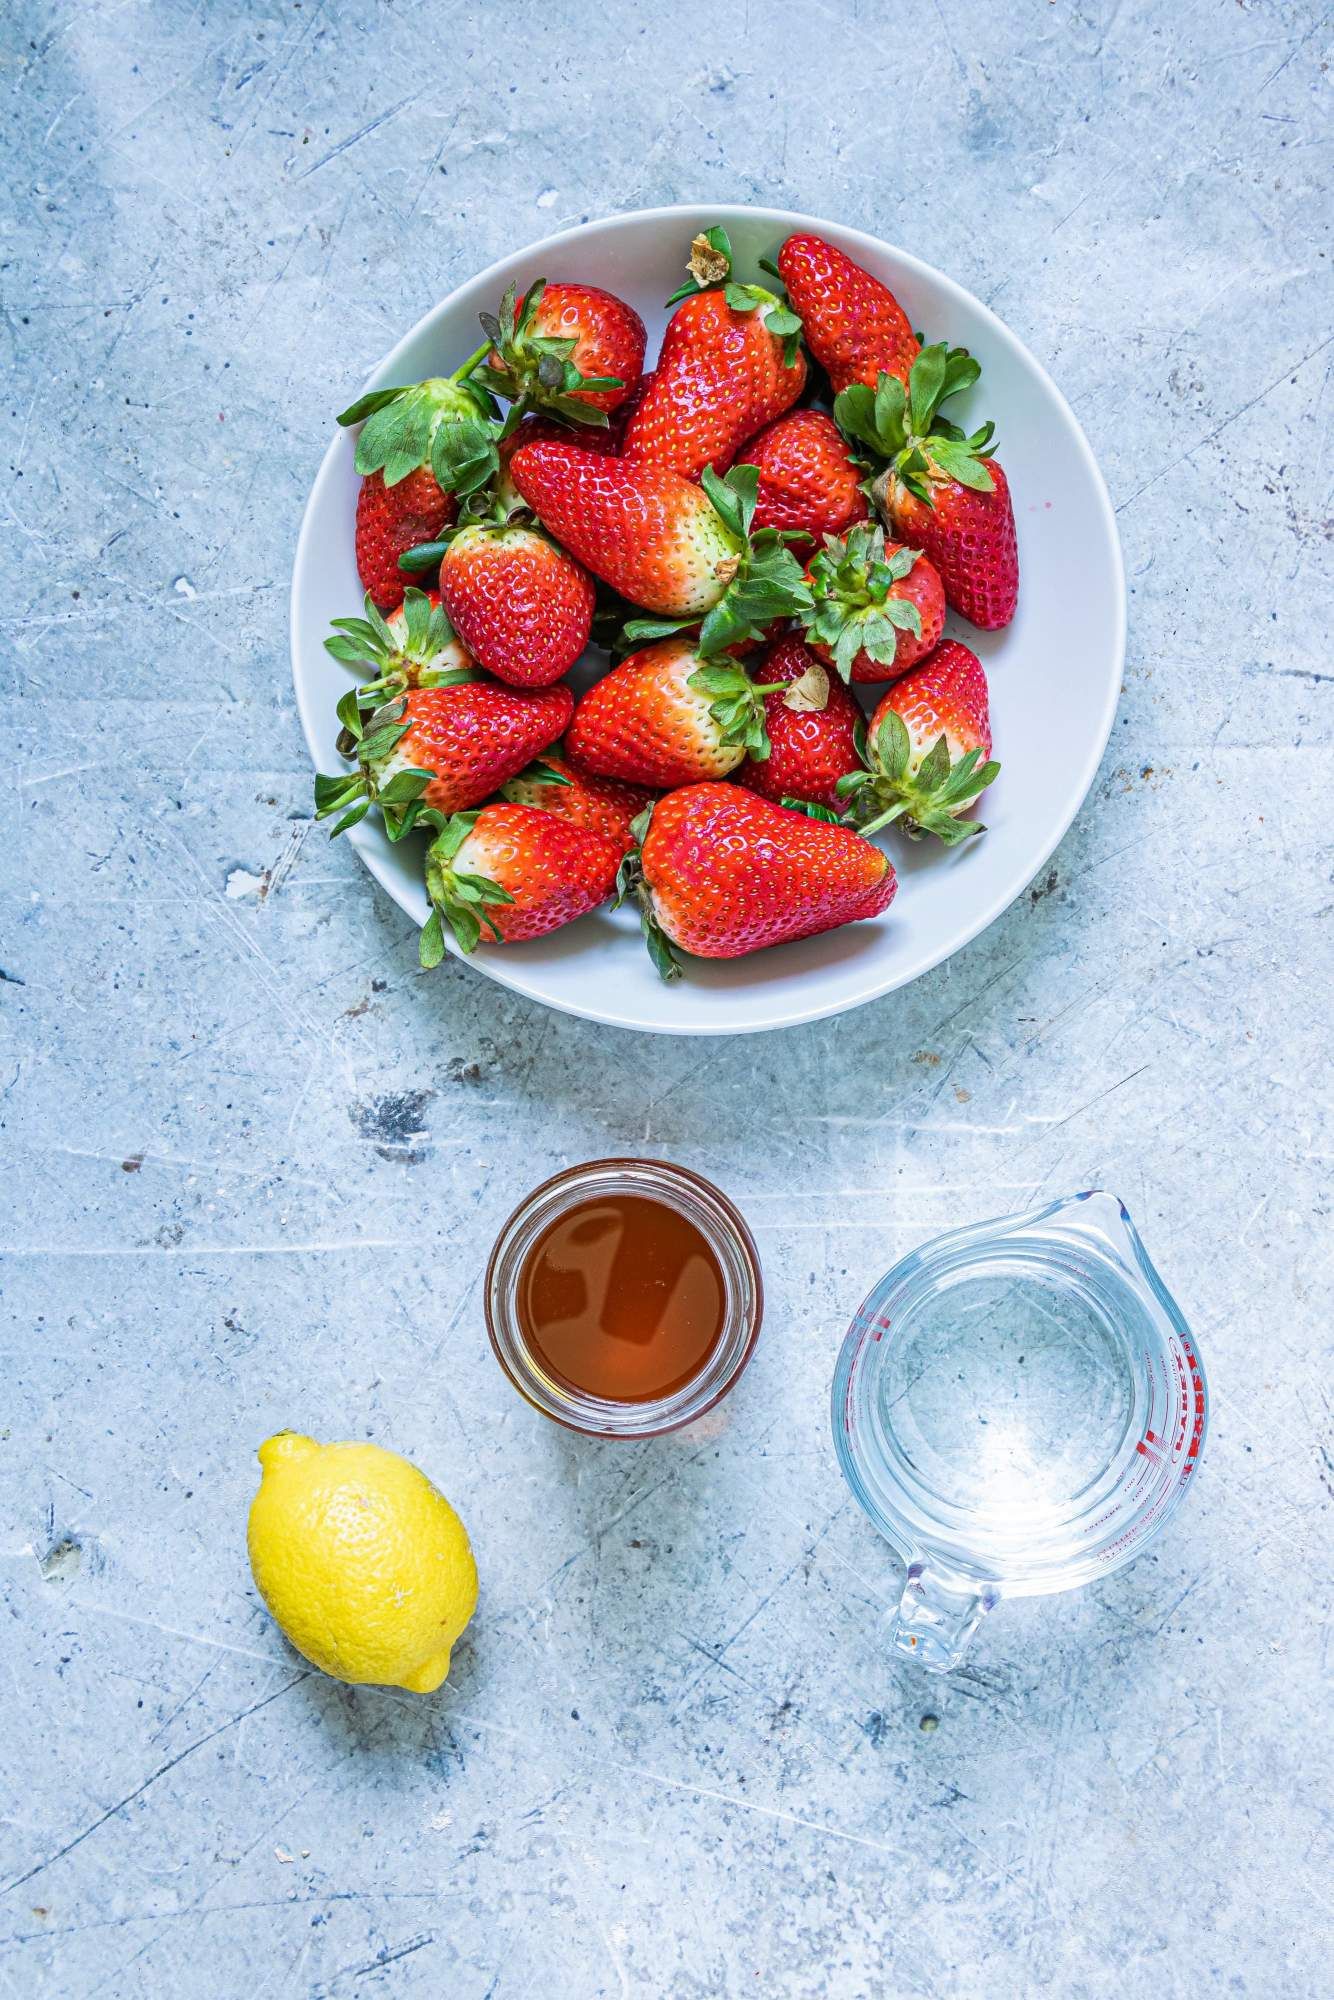 Ingredients to make strawberry popsicles including fresh strawberries, honey, water, and lemon juice.